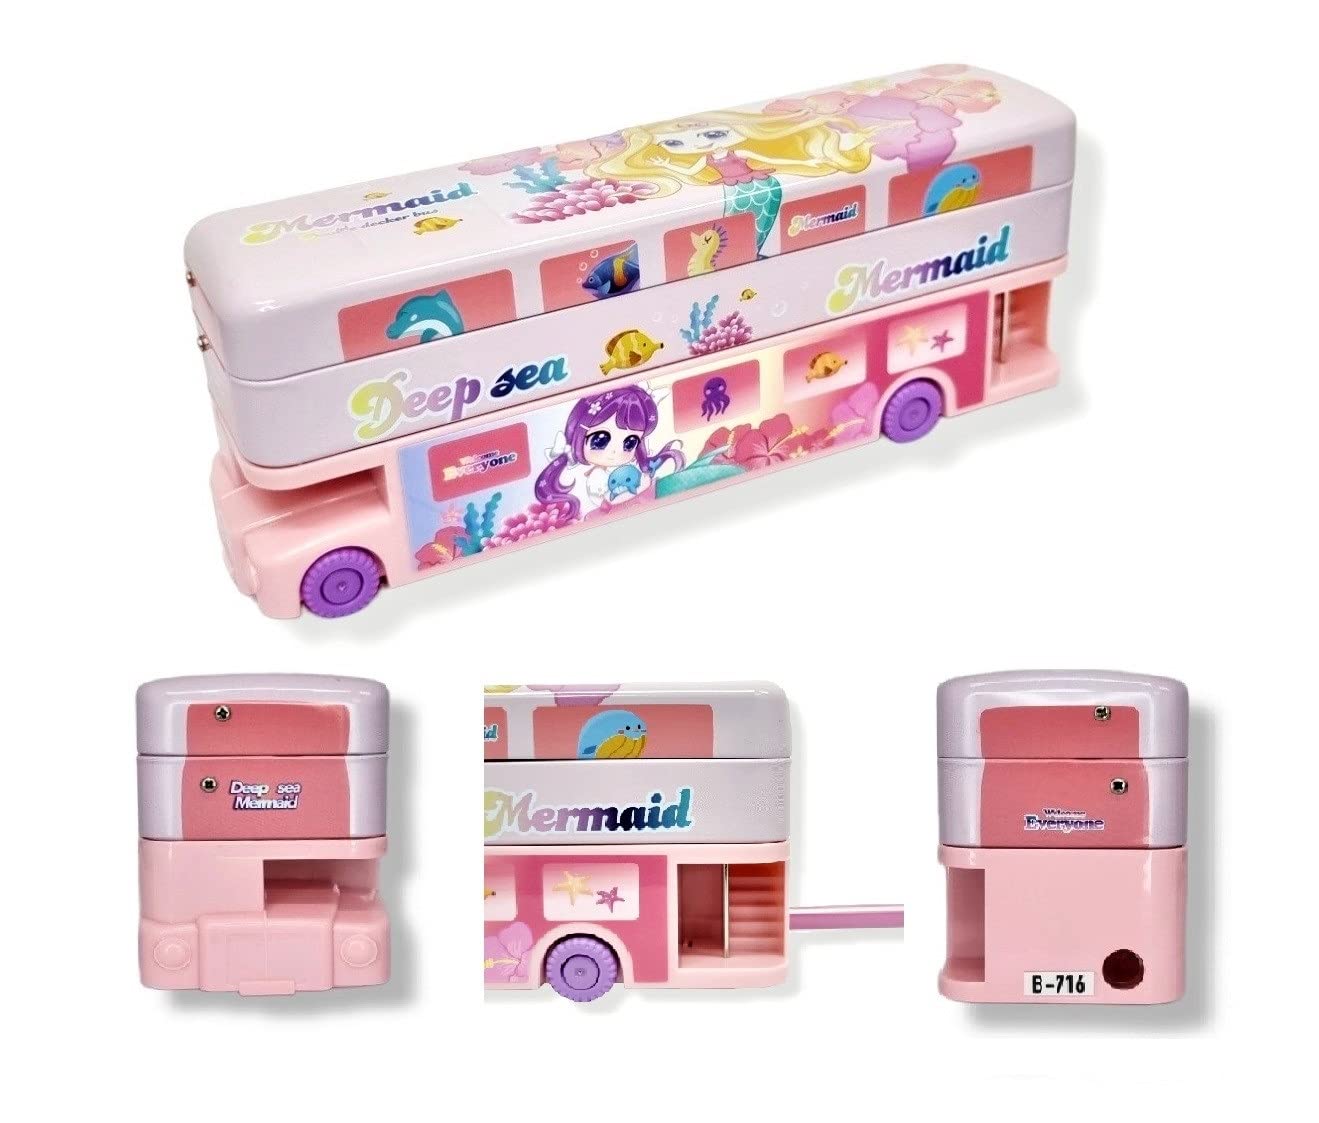 bus-pencil-box-for-kids-with-moving-tyres-sharpener-geometry-case-for-boys-girls